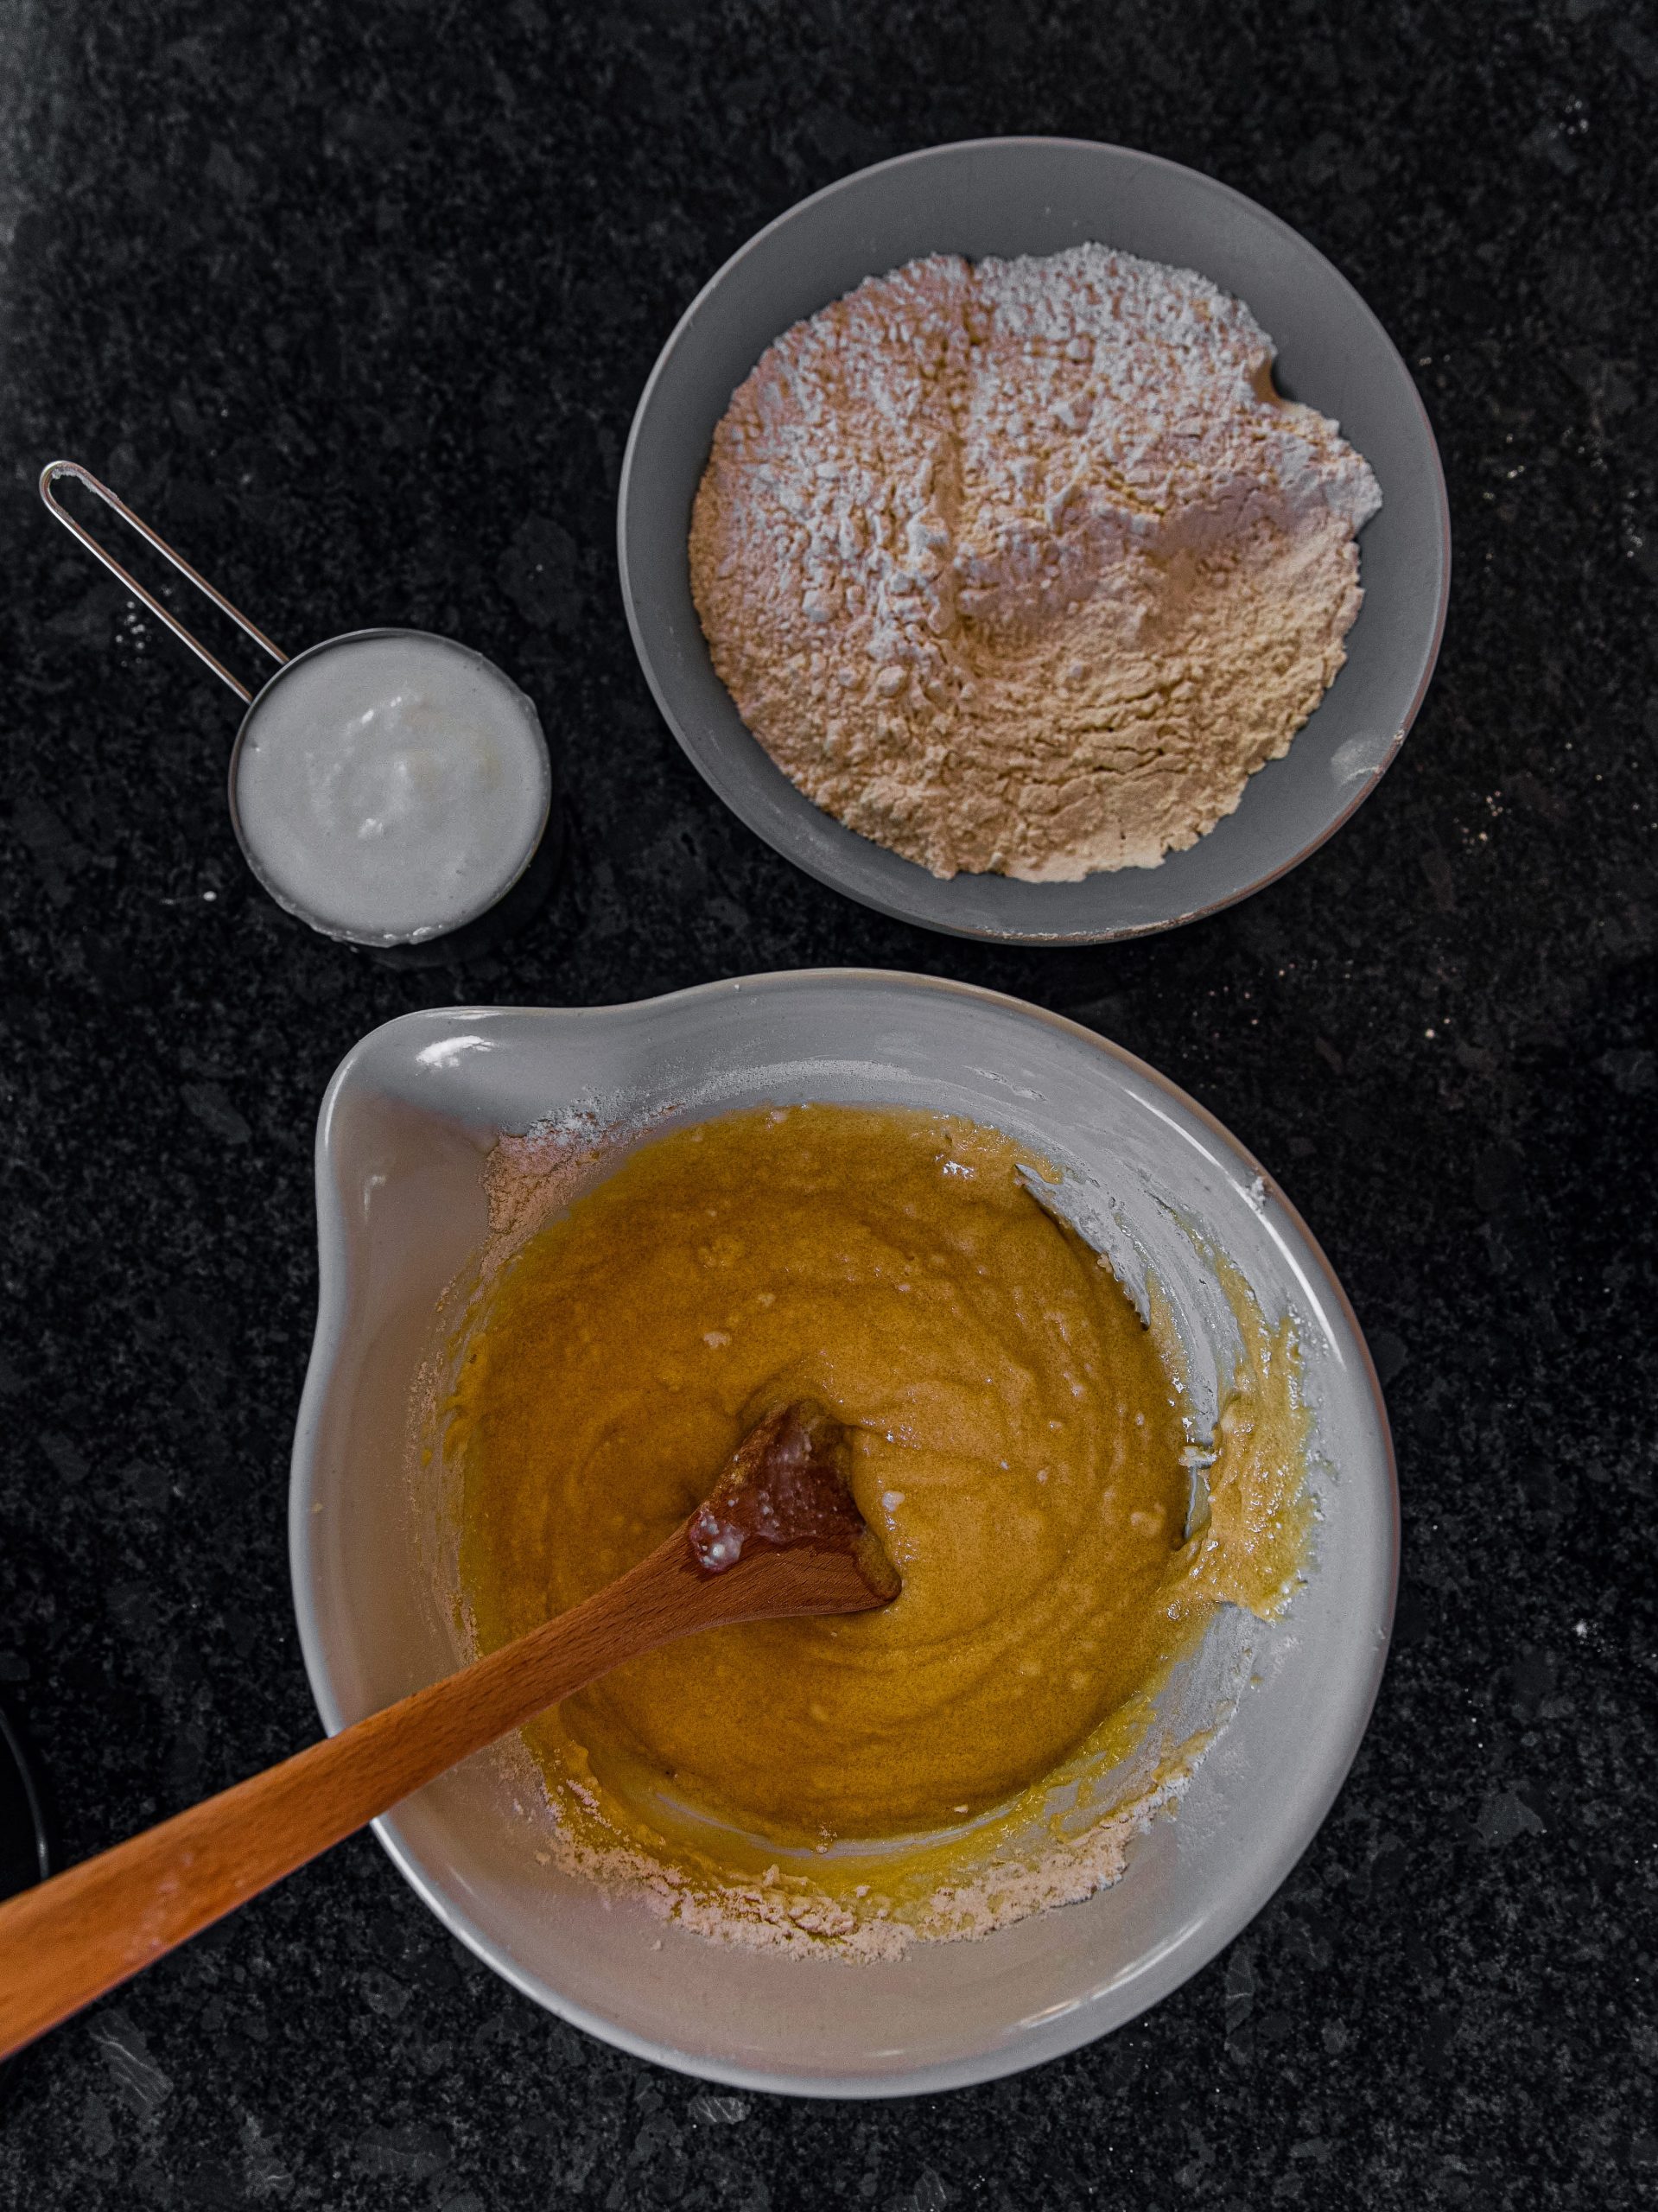 Beat in the flour mixture alternately with the buttermilk.